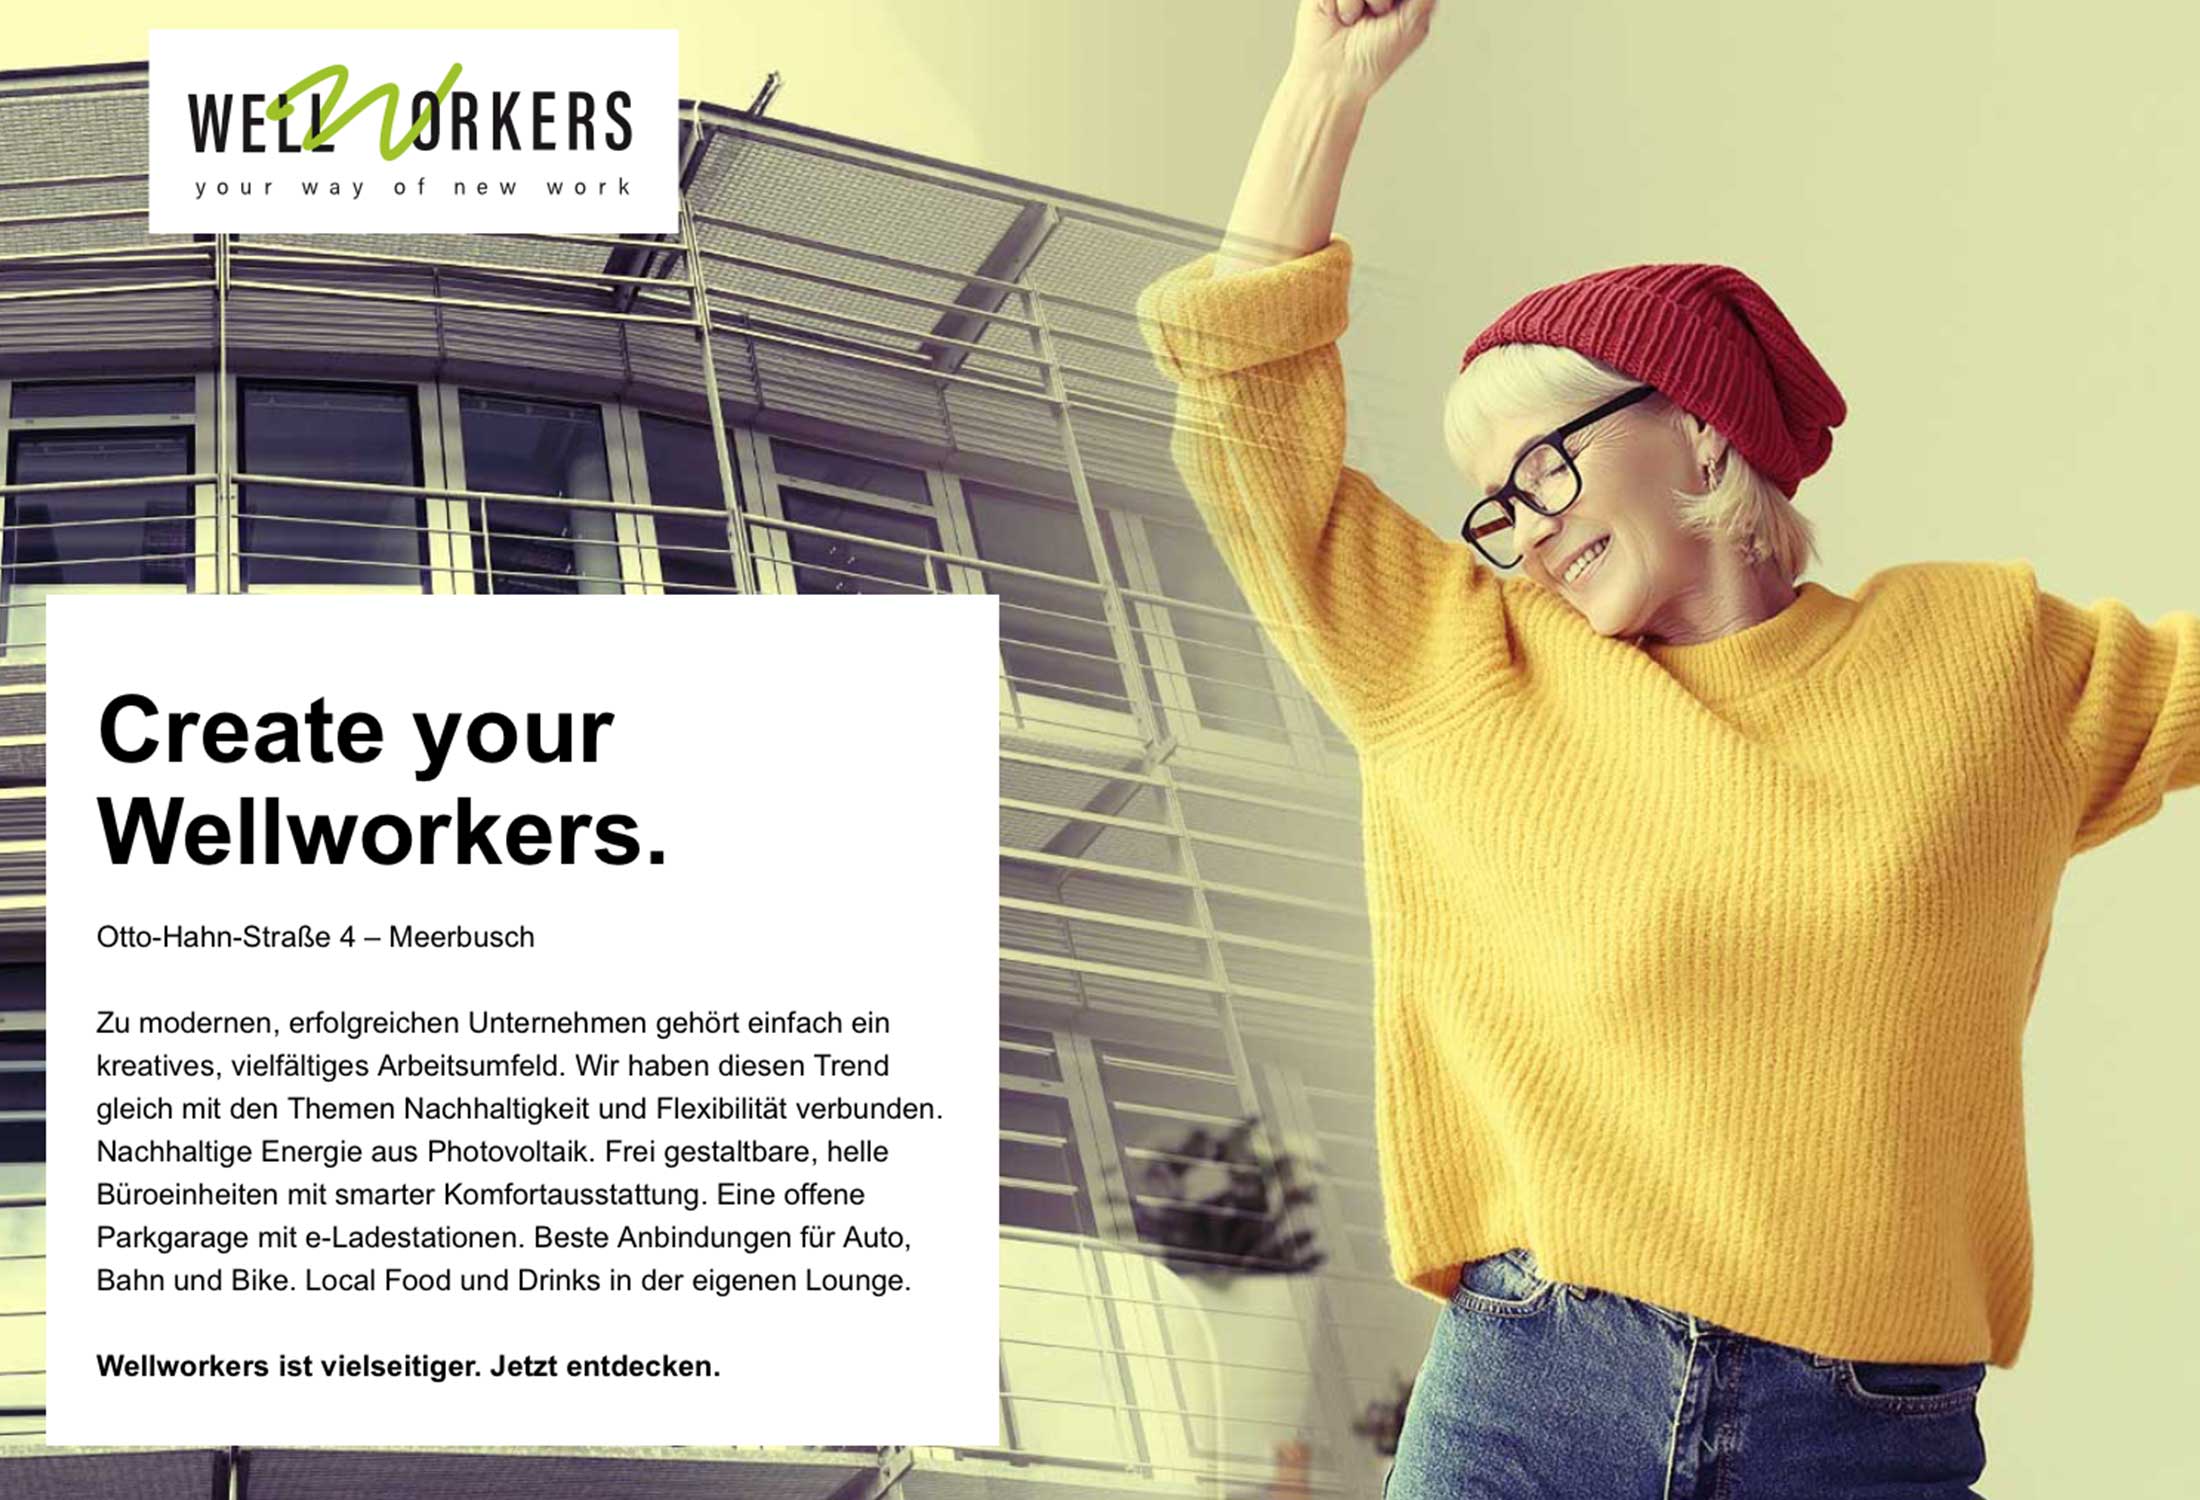 immobilienwerbung-zb2-wellworkers-keyvisual04